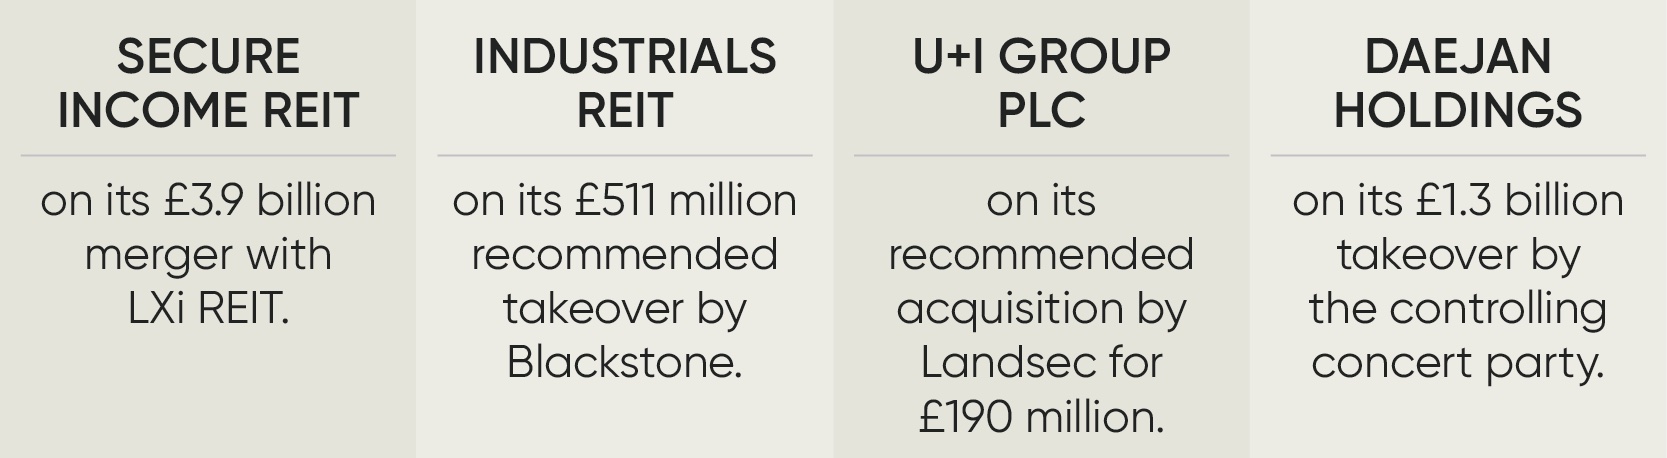 Secure Income REIT on its £3.9 billion merger with LXi REIT. Industrials REIT on its £511 million recommended takeover by Blackstone. U+I Group on its recommended acquisition by Landsec for £190 million. Daejan Holdings on its £1.3 billion takeover by the controlling concert party.